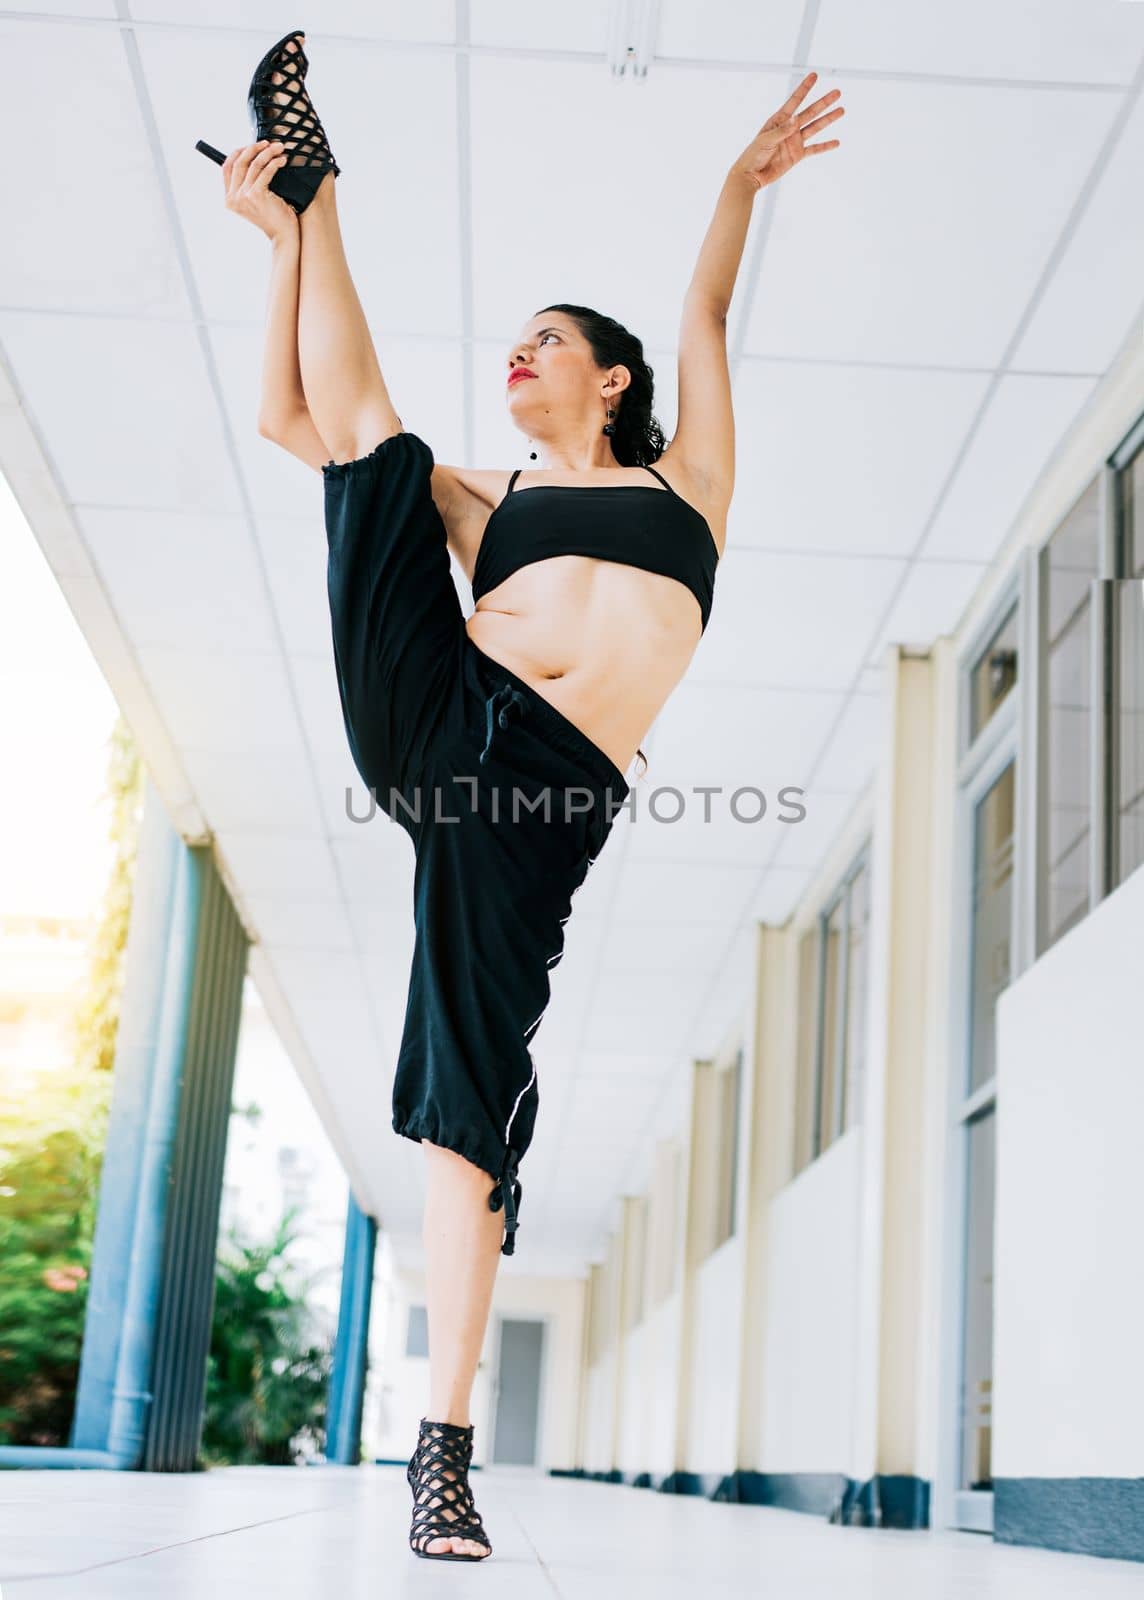 Dance girl doing flexibility in high heels. Woman dancer in heels doing yoga flexibilities. Dance artist woman doing acrobatics and flexibilities in heels. Artistic gymnastics concept by isaiphoto